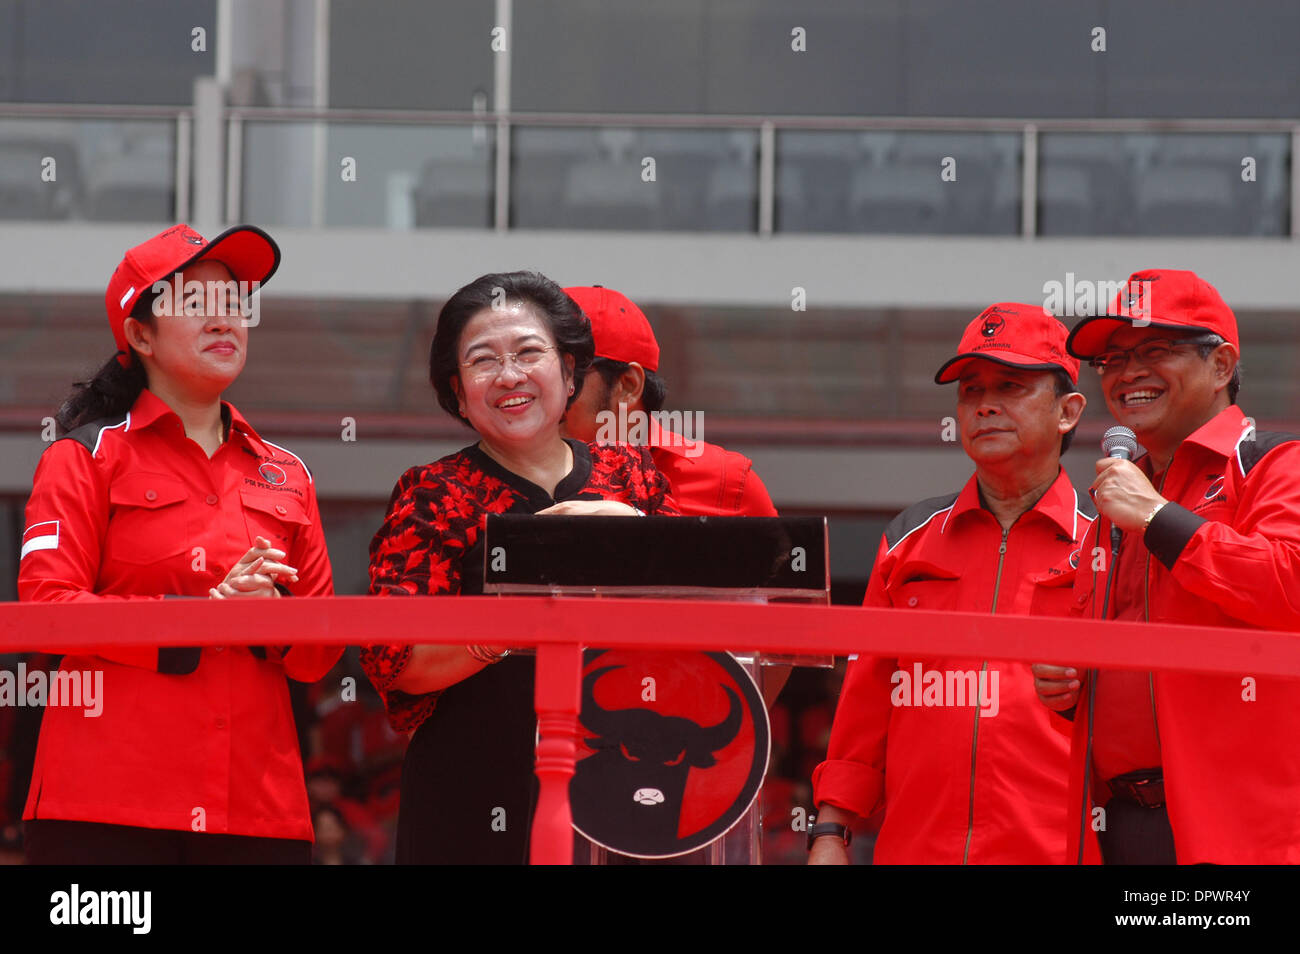 Apr 05, 2009 - Jakarta, Indonesia - Former president and the leader of the Indonesian Democratic Party in Struggle (PDI Perjuangan), MEGAWATI SUKARNO PUTRI  (L) with her daughter PUAN MAHARANI (R) during the campaign in Jakarta, Indonesia, April 4, 2009. Legislative elections for the 128 seats of the Regional Representatives Council and the 560 seats of the People's Representative  Stock Photo